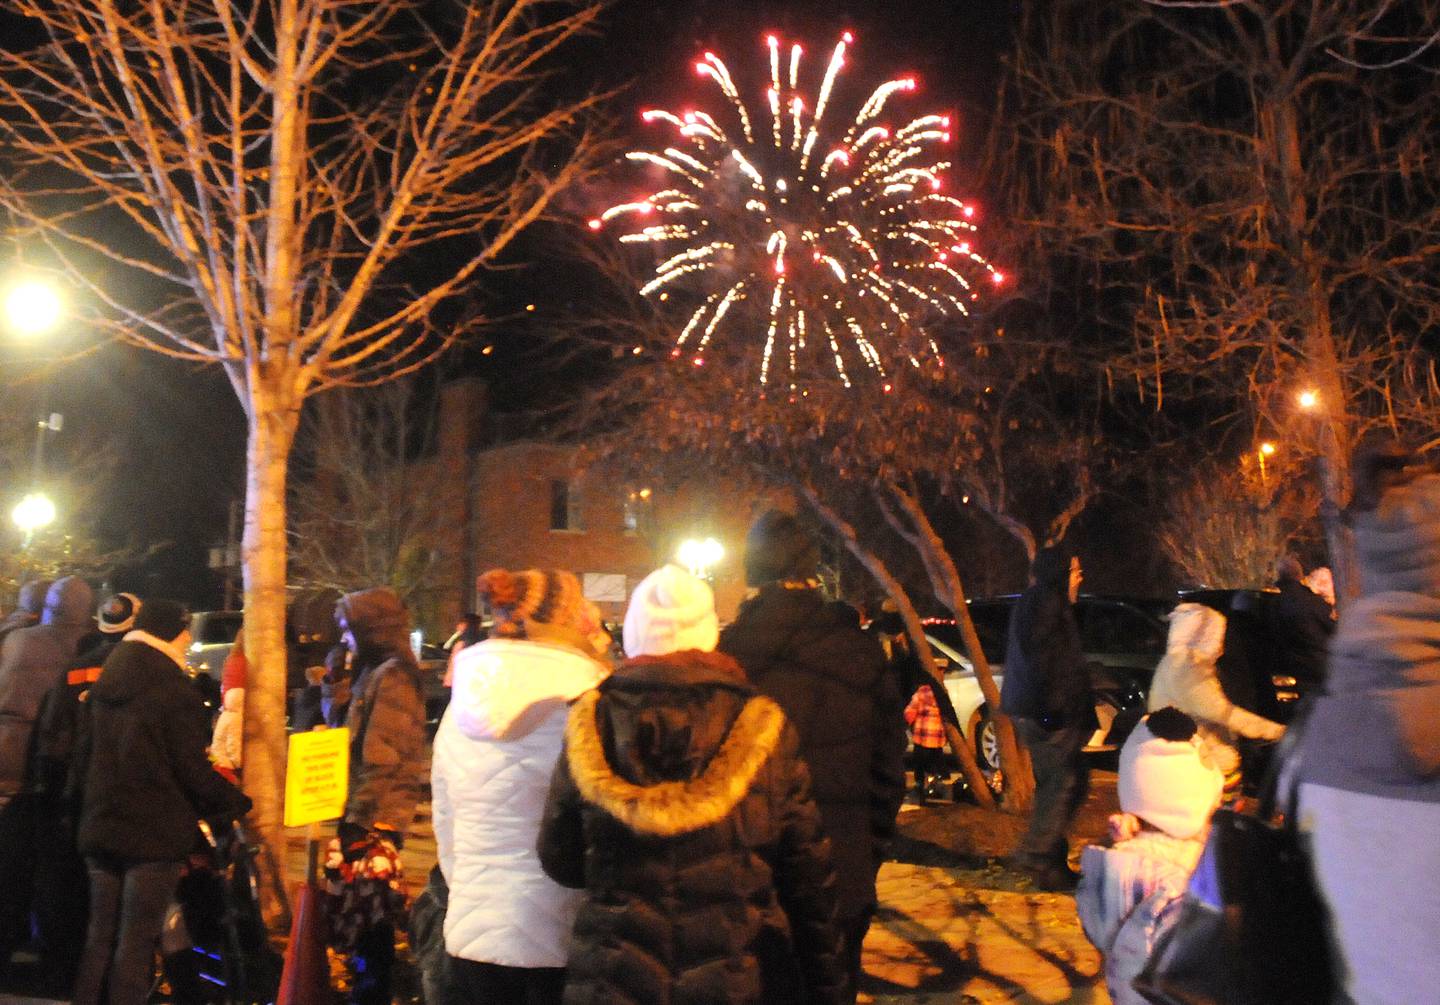 The crowd at the Jordan block watches the Festival of Lights fireworks in downtown Ottawa on Friday, Nov. 26, 2021.